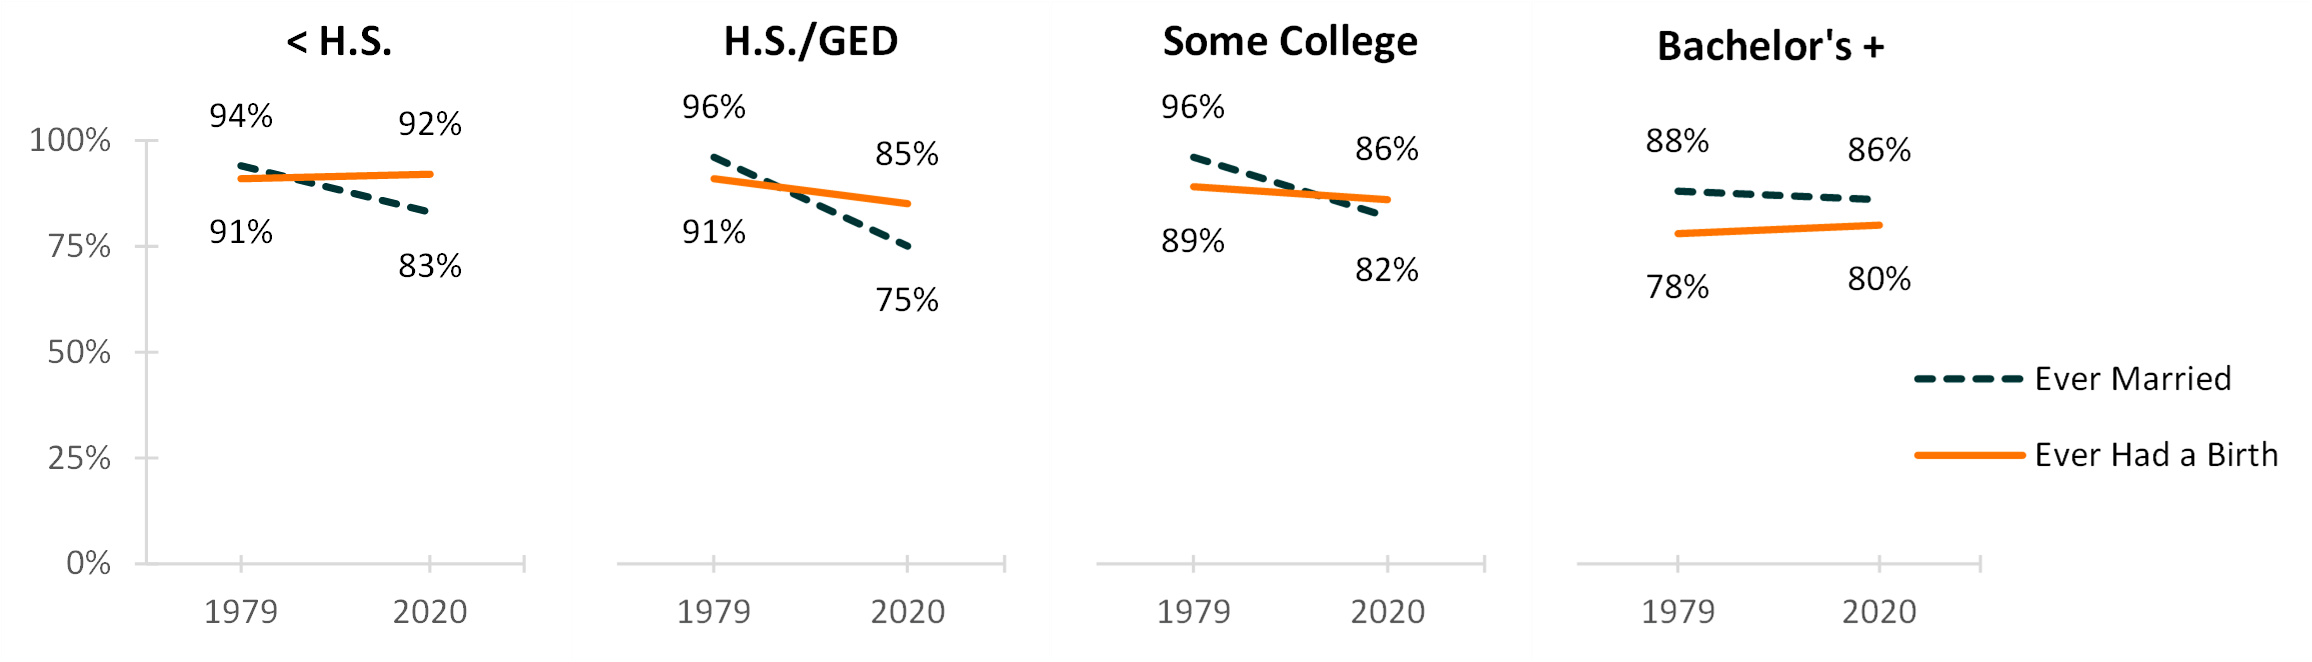 graph showing Figure 3. Shares of Women Aged 40-44 Who Ever Married and Had a Birth in 1979 & 2020 by Educational Attainment